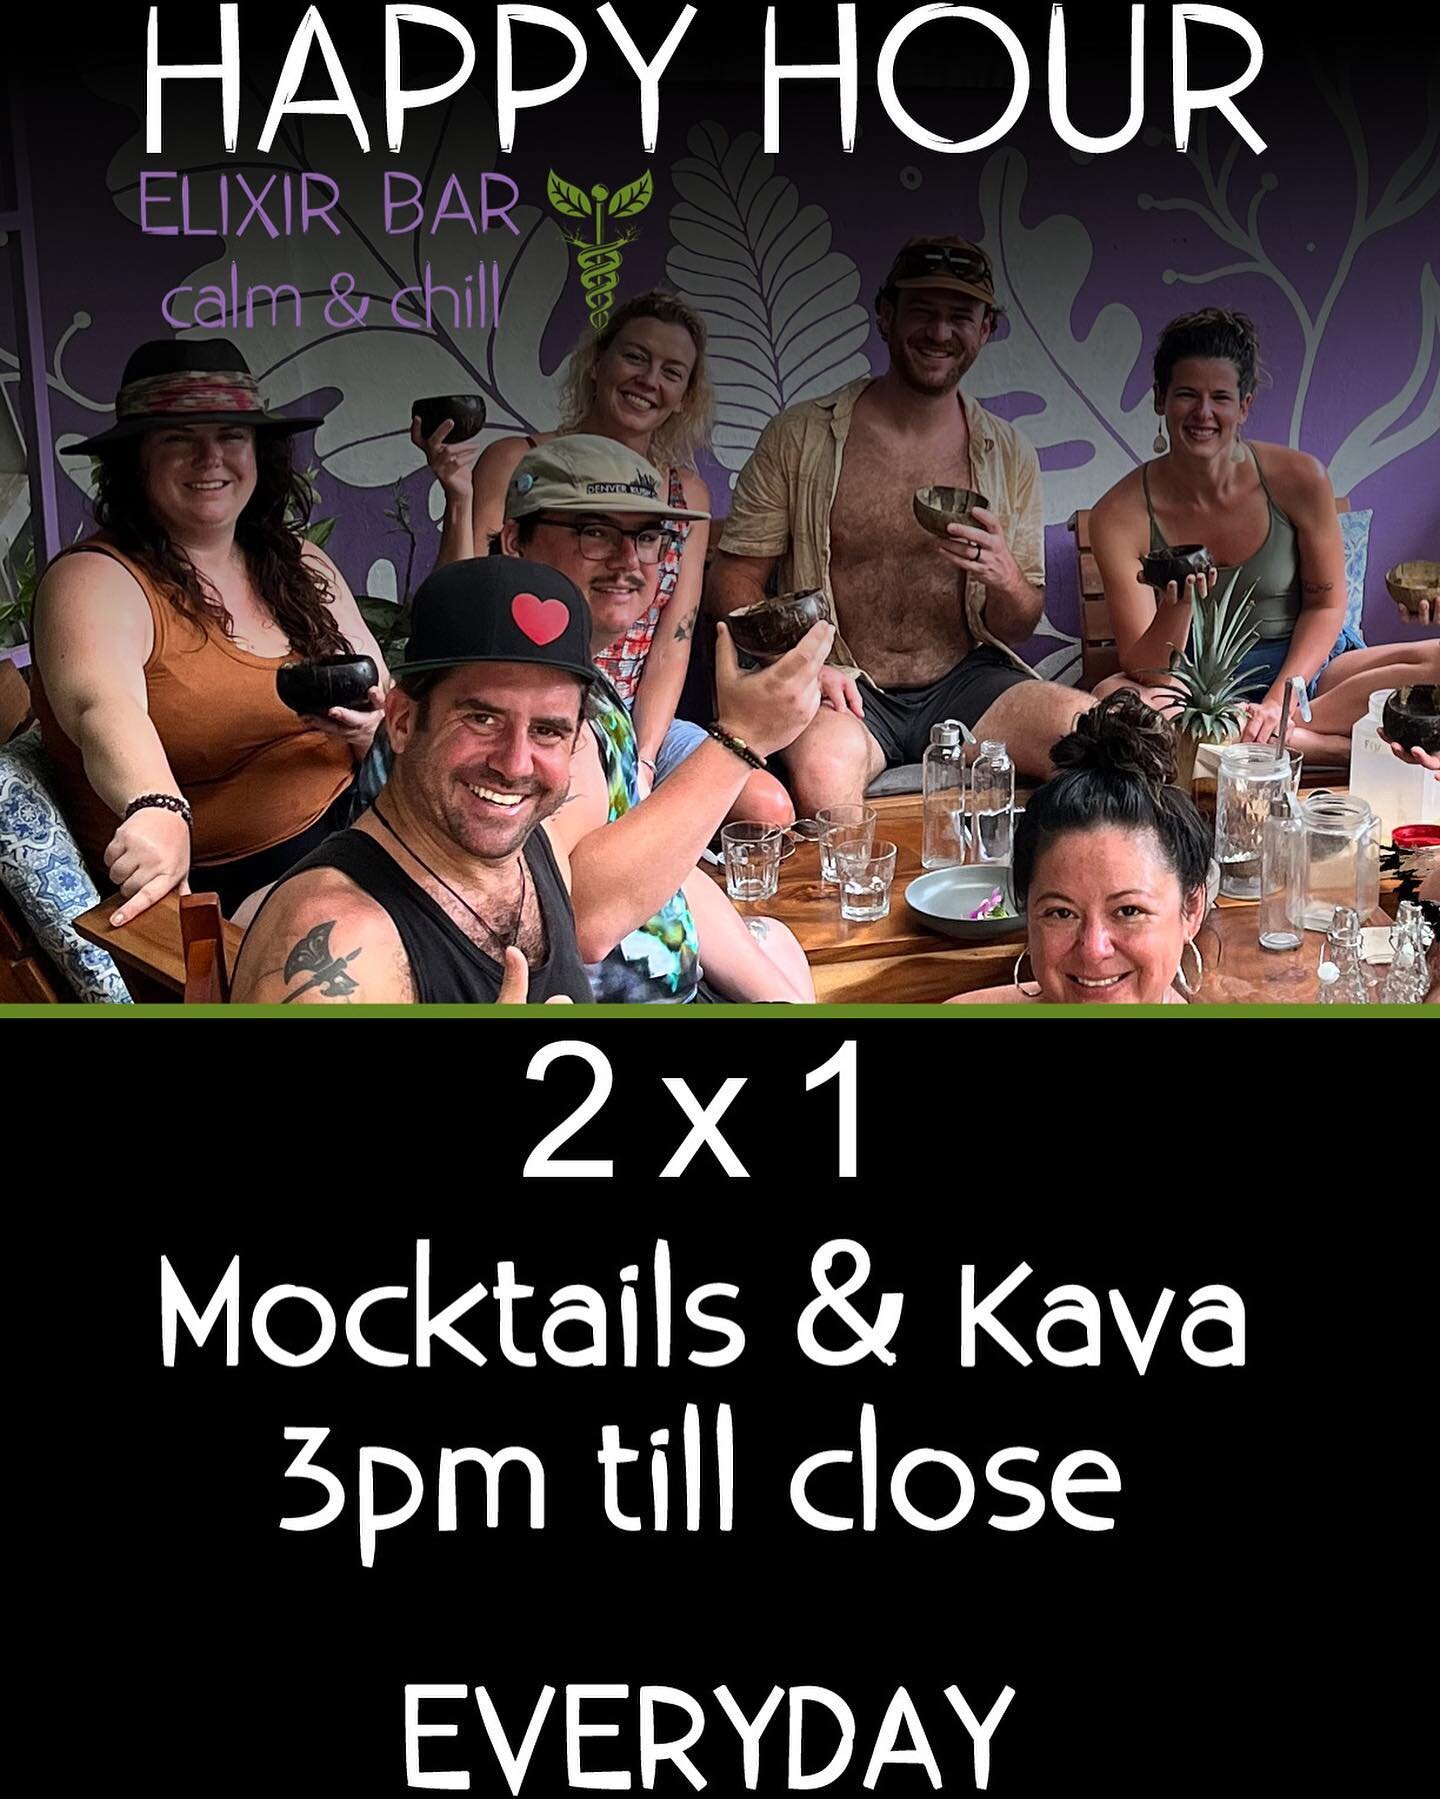 Happy Hour Everyday from 3pm until close. 2x1 Mocktails / 2x1
Kava (except Wednesdays because we are closed) 💜💚 #happyhour #kava #mocktail #calm #chill